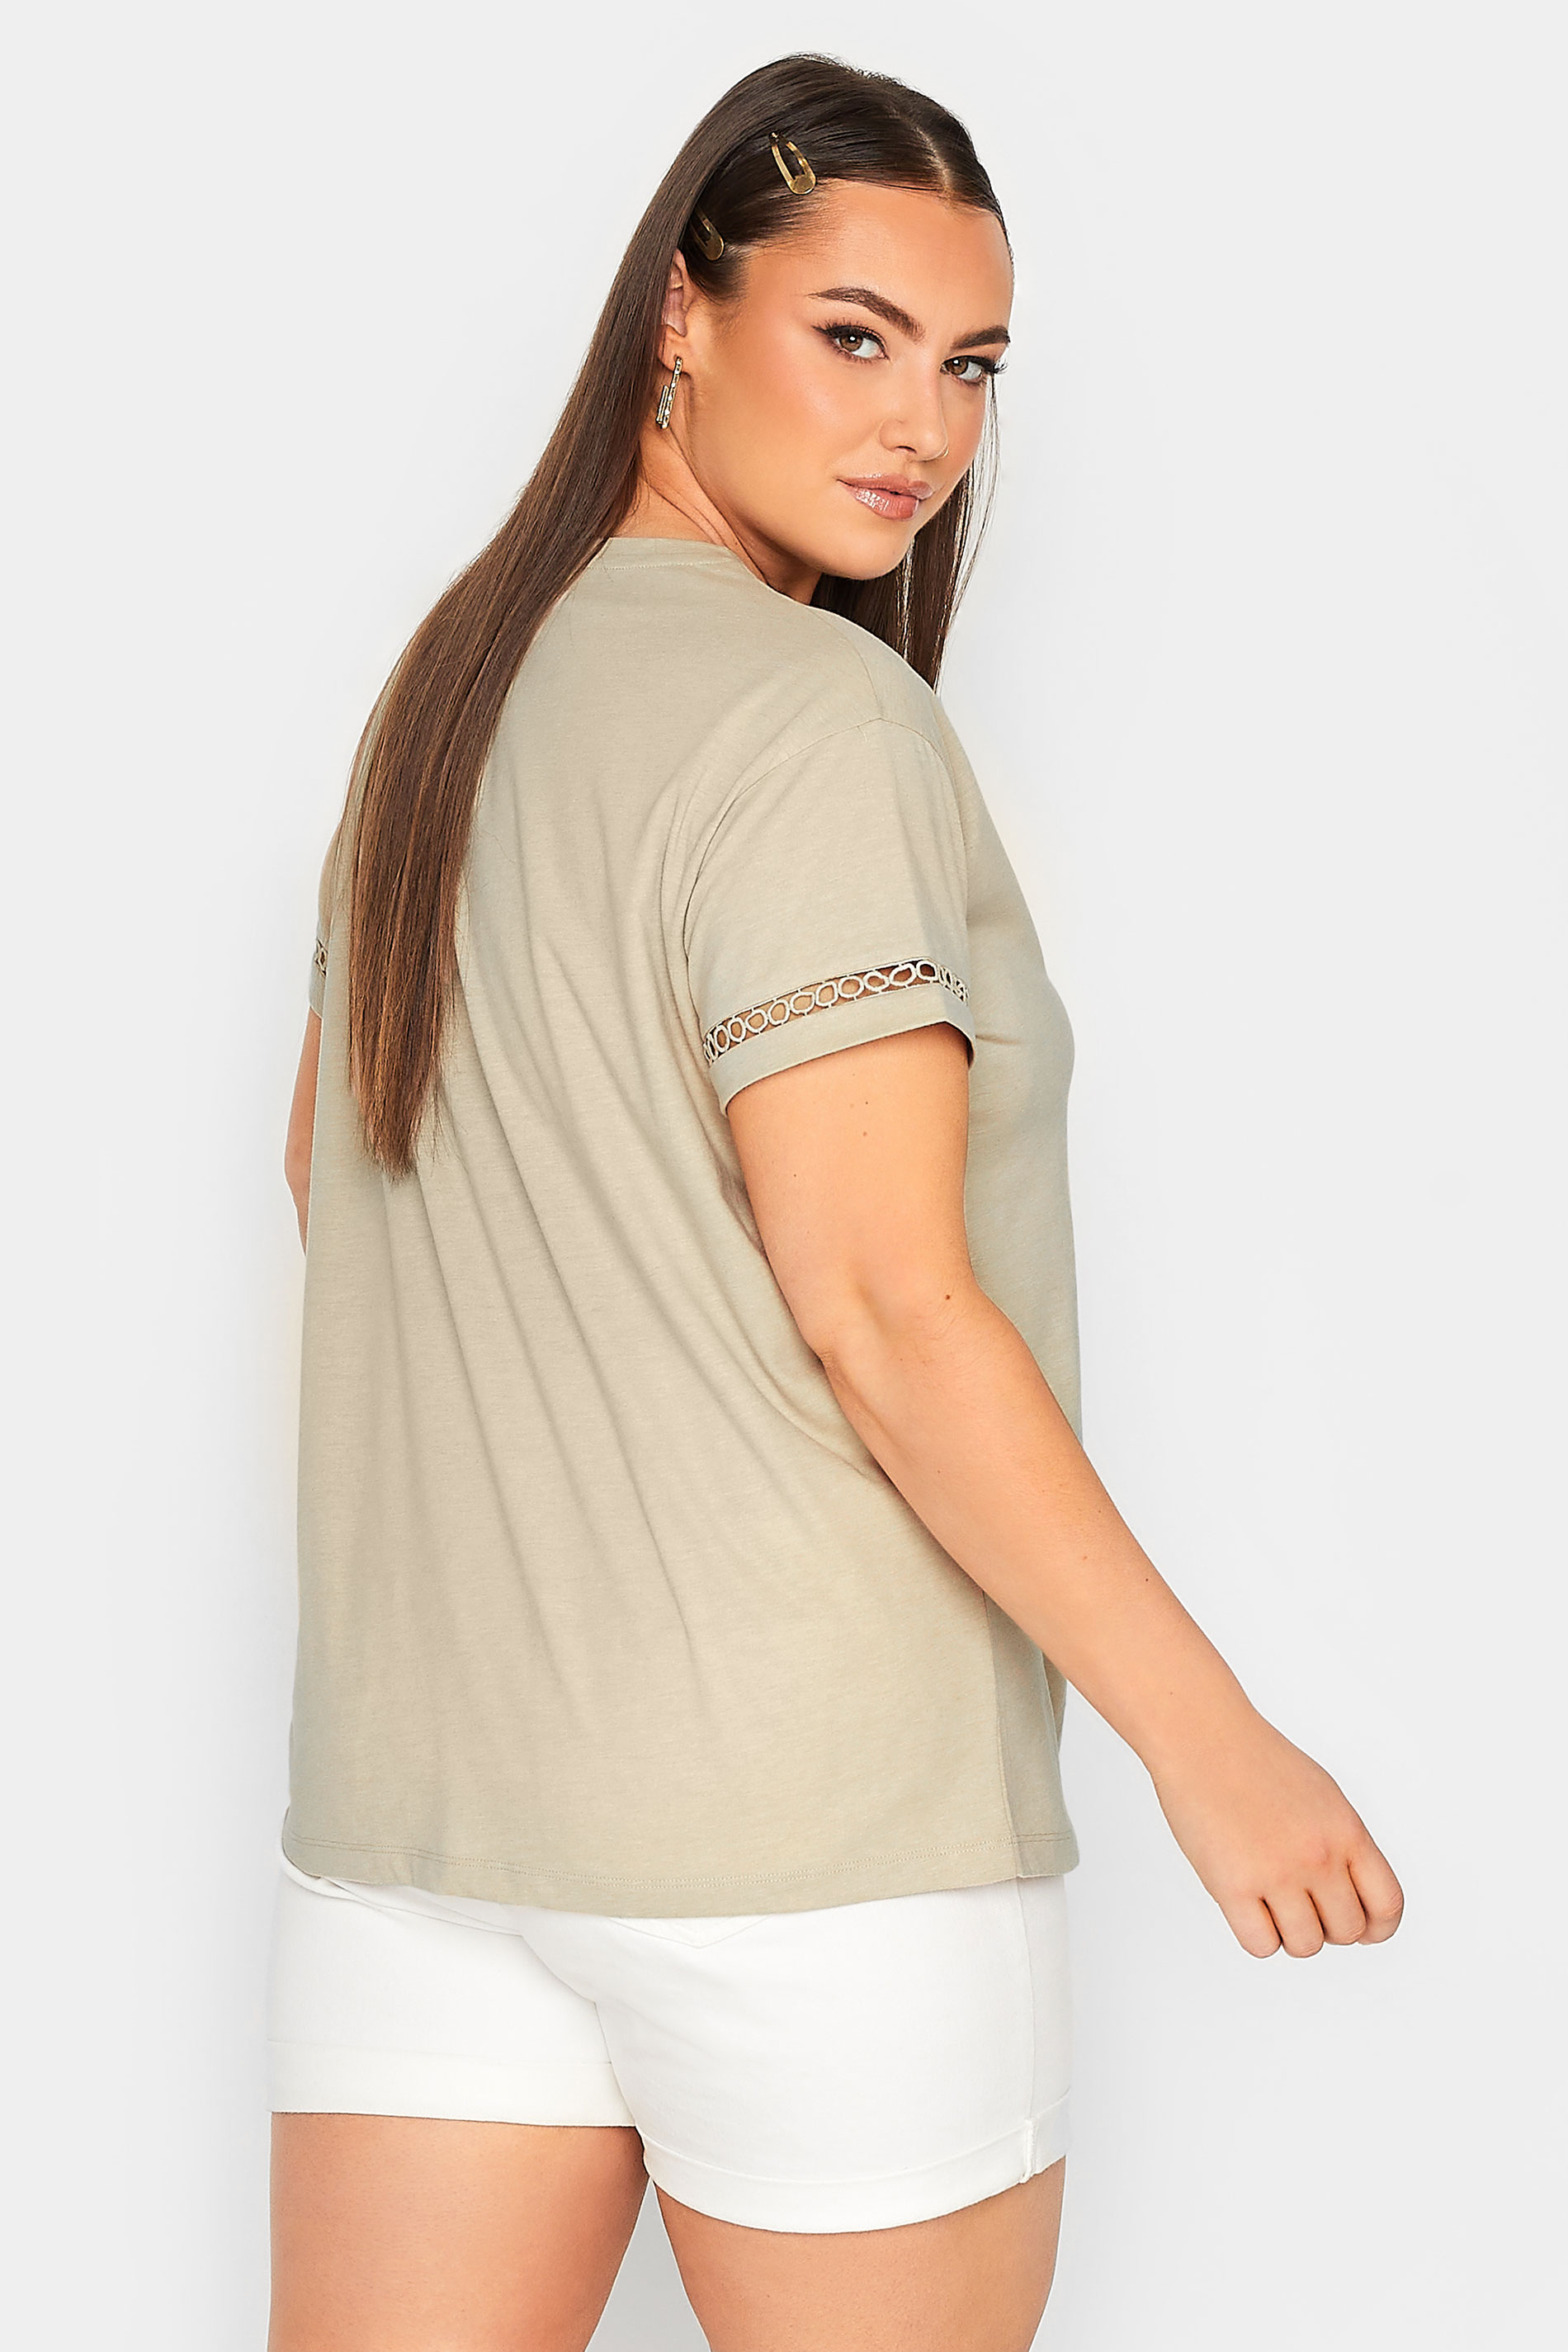 LIMITED COLLECTION Plus Size Beige Brown Crochet Trim T-Shirt | Yours Clothing  3